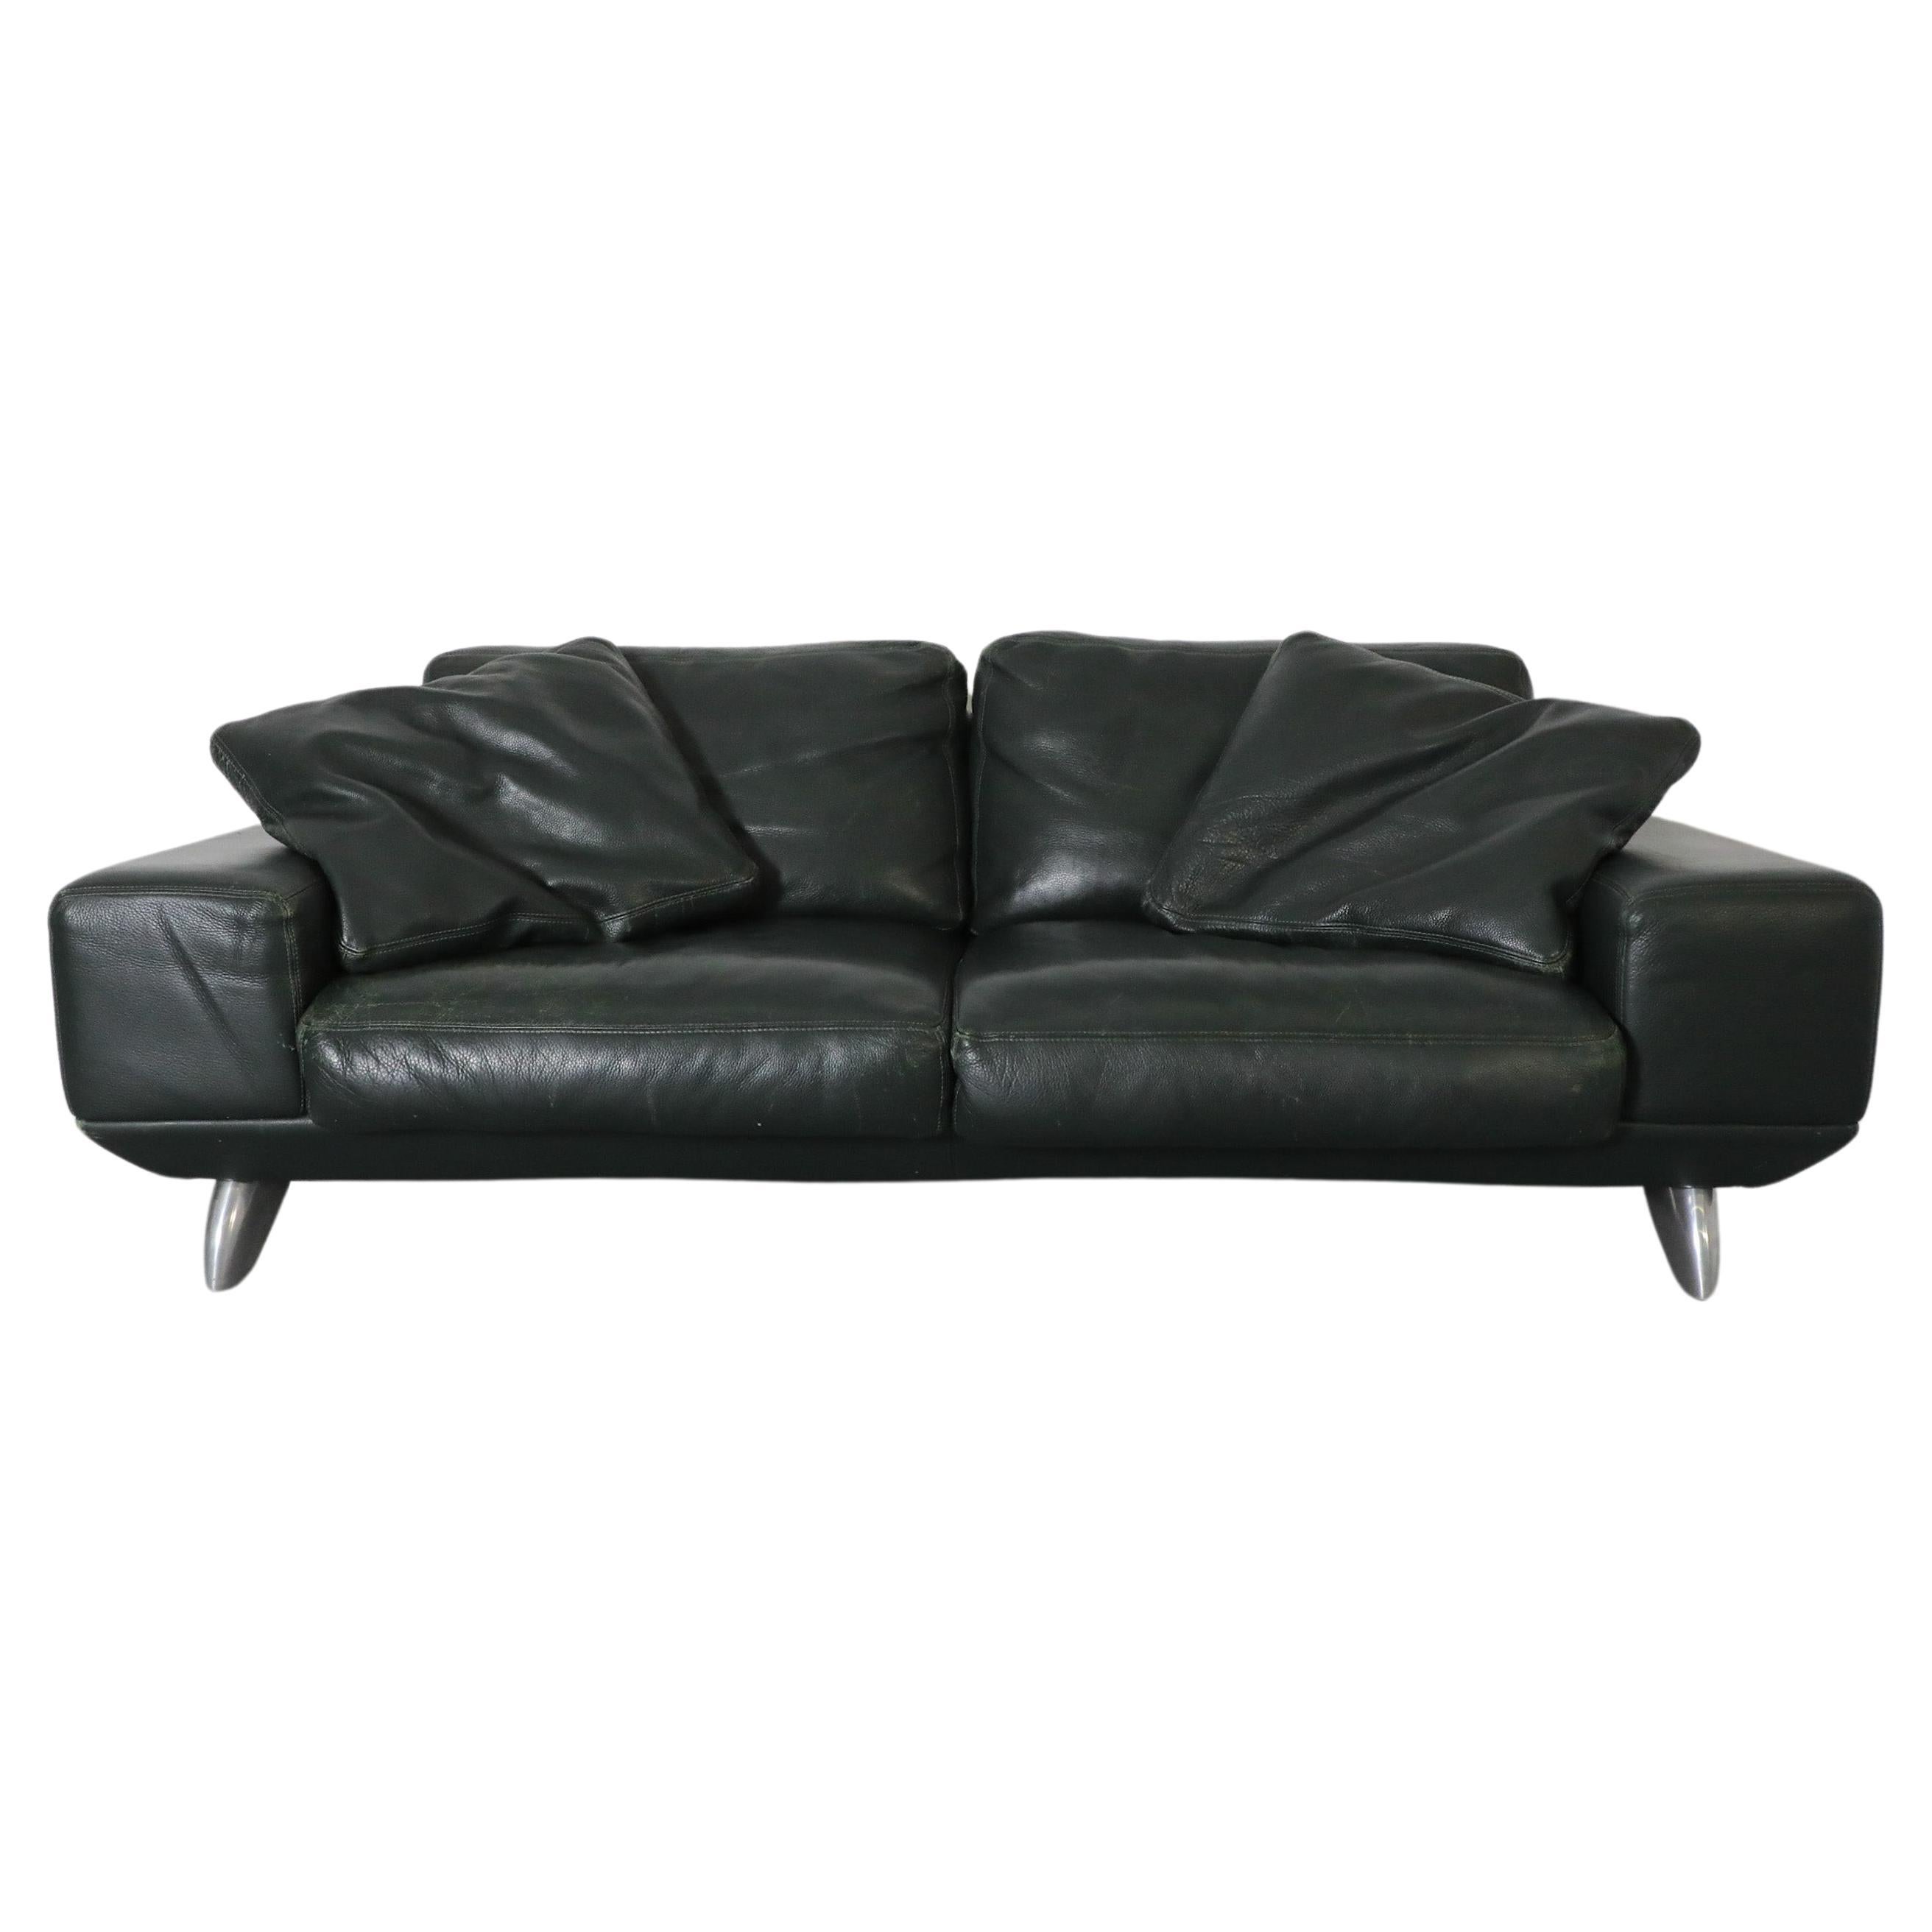 Handsome 80's Dark Green Leather Sofa by Molinari w/ Wide Arms & Metal Legs For Sale